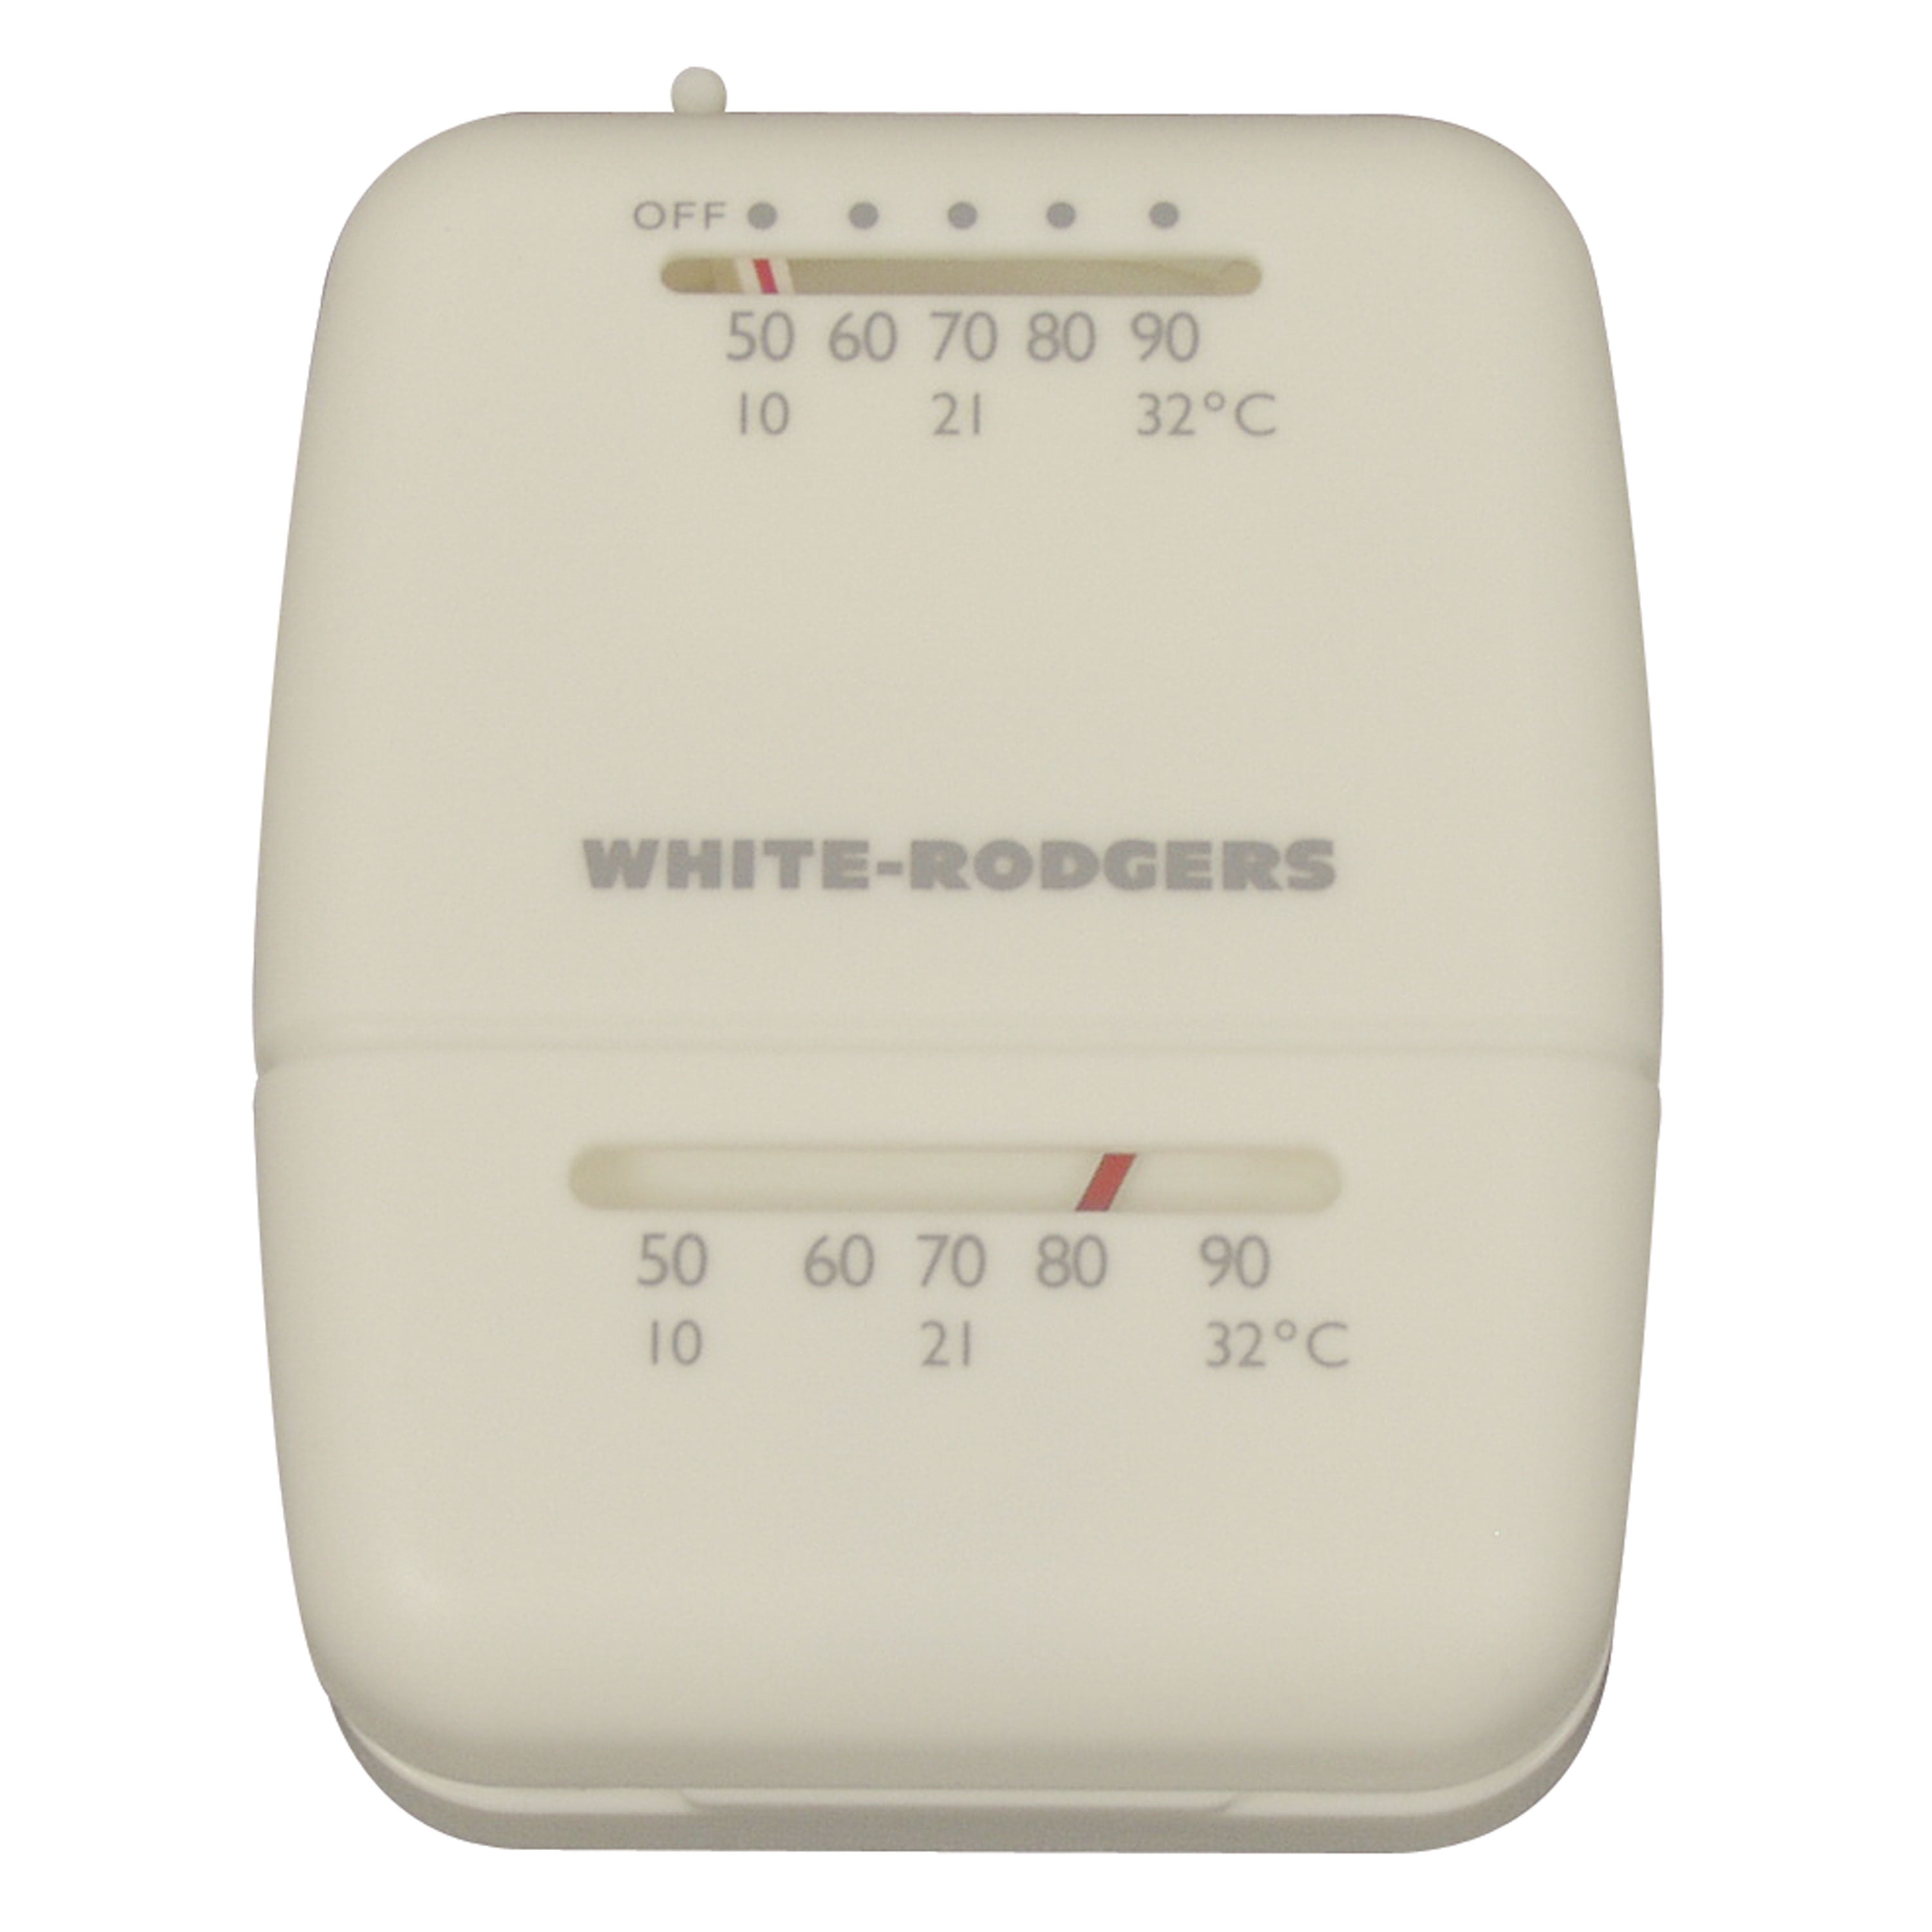 white-rodgers-1c20101s1-white-rodgers-heating-thermostat-white